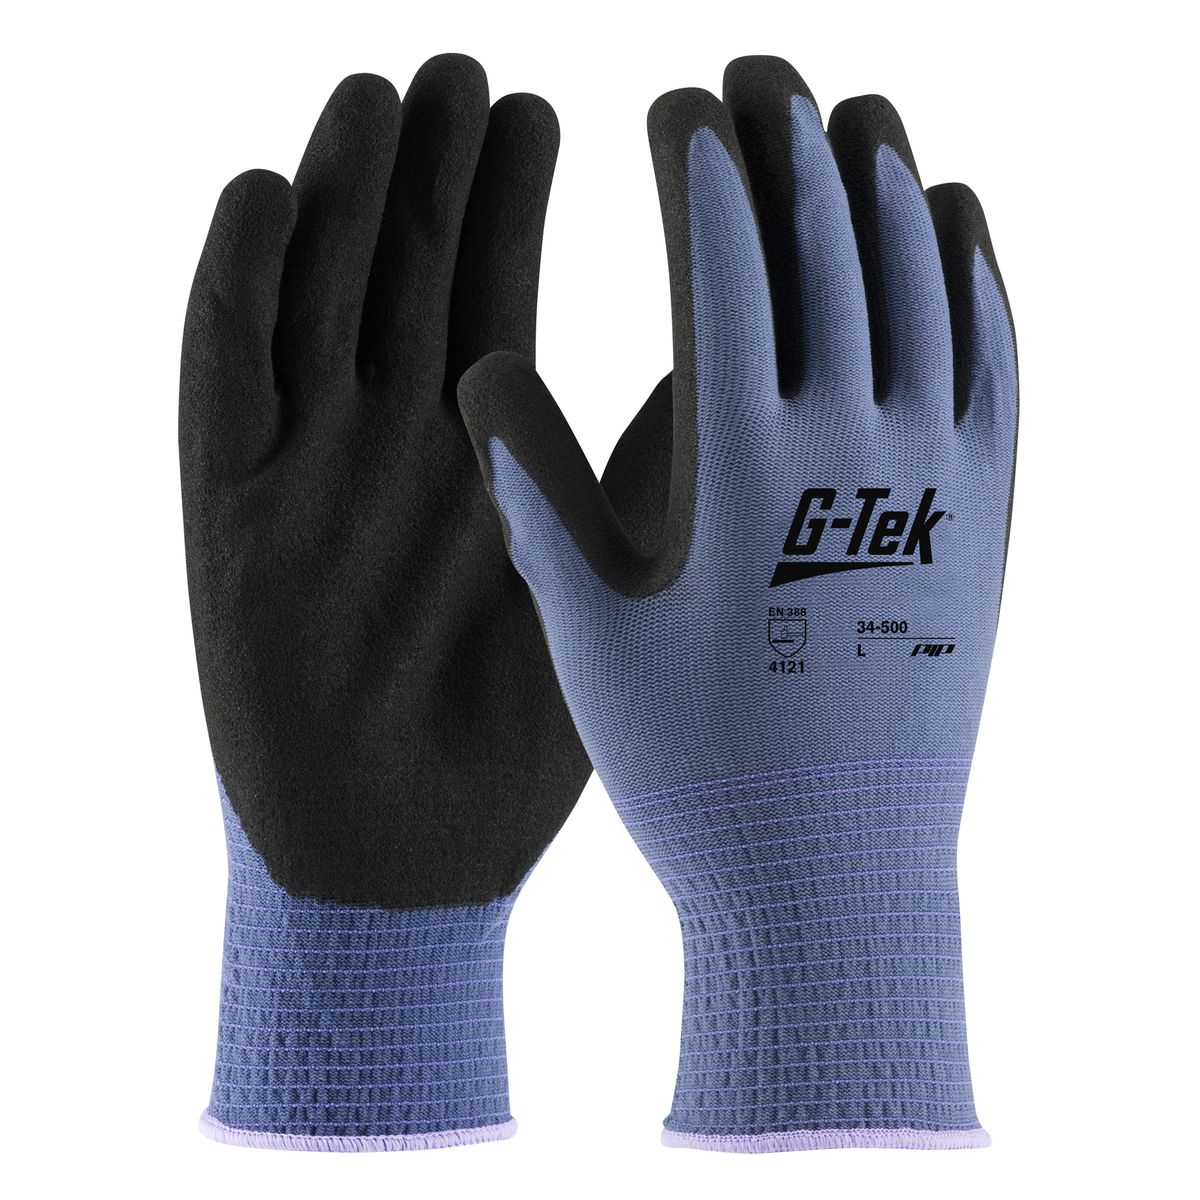 PIP® G-Tek® GP™ 13 Gauge Black Nitrile Palm And Finger Coated Work Gloves With Nylon Liner And Continuous Knit Wrist